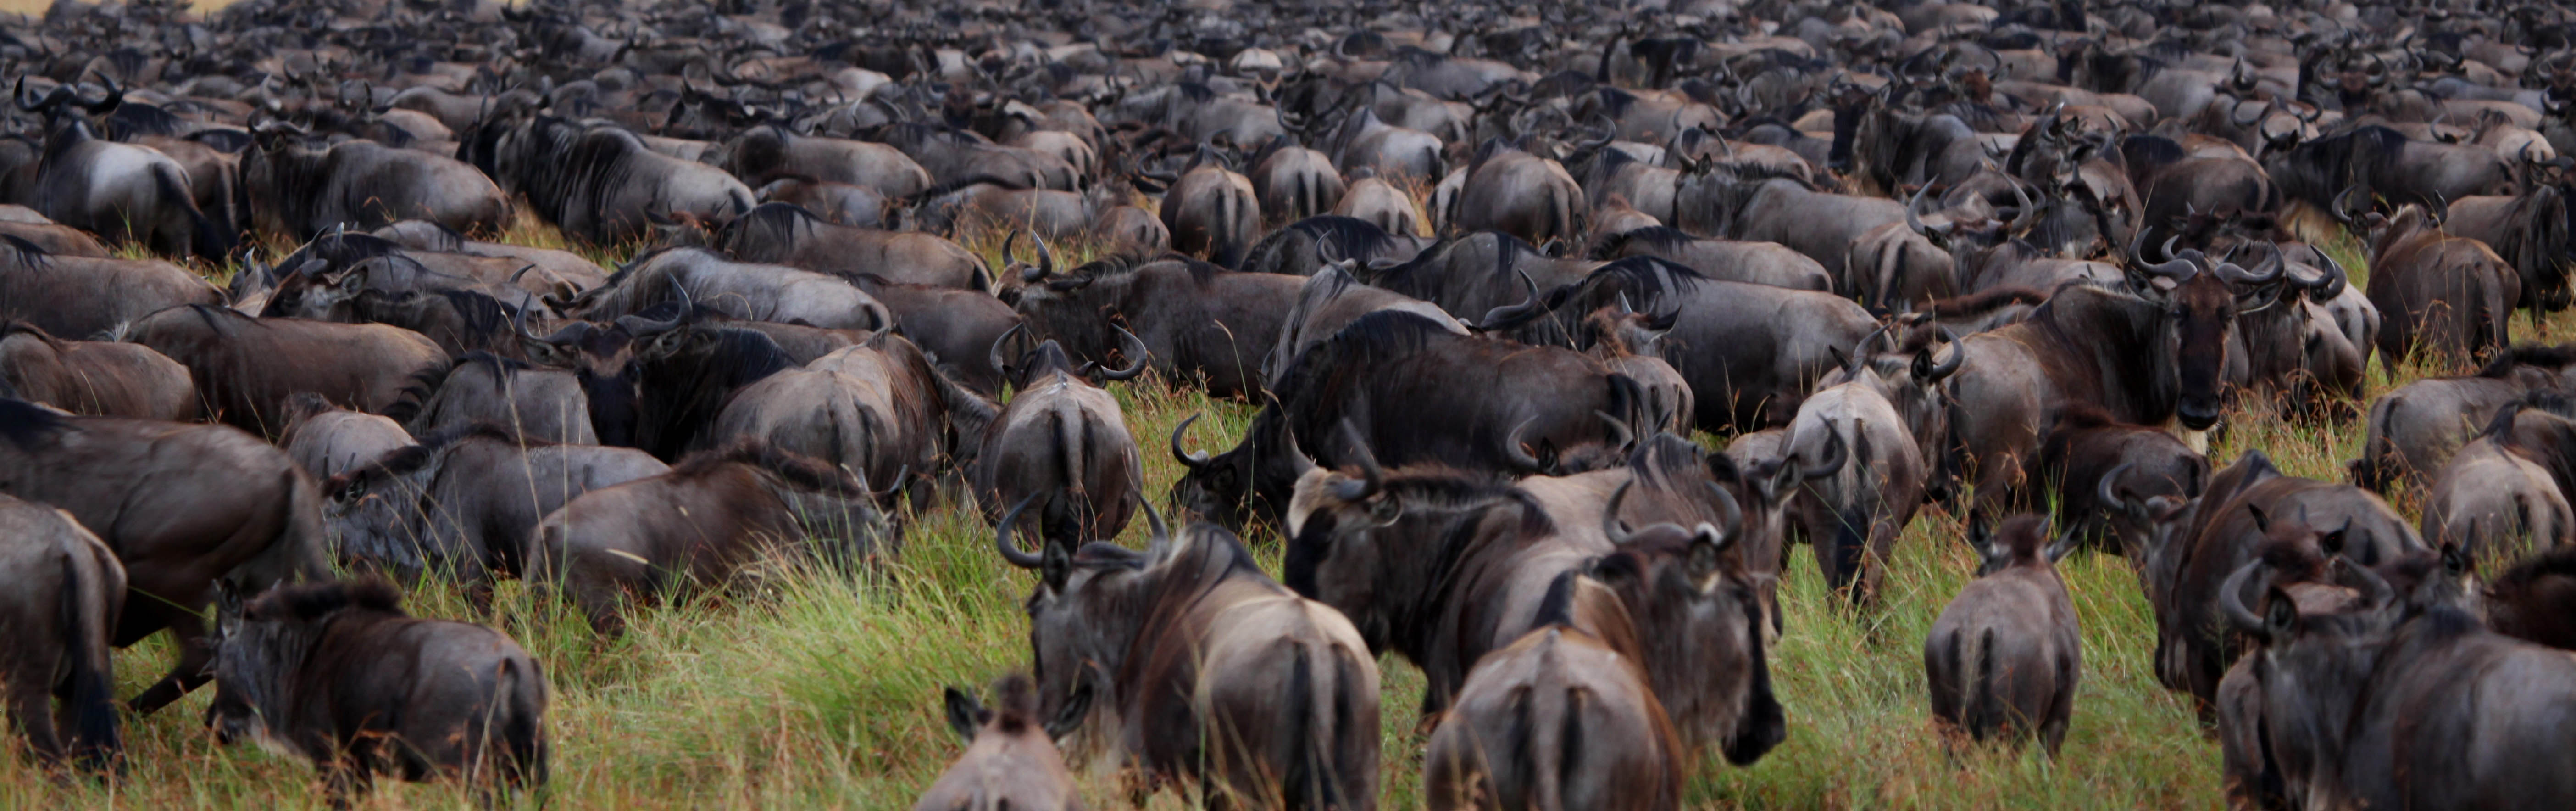 The great migration, Serengeti National Park